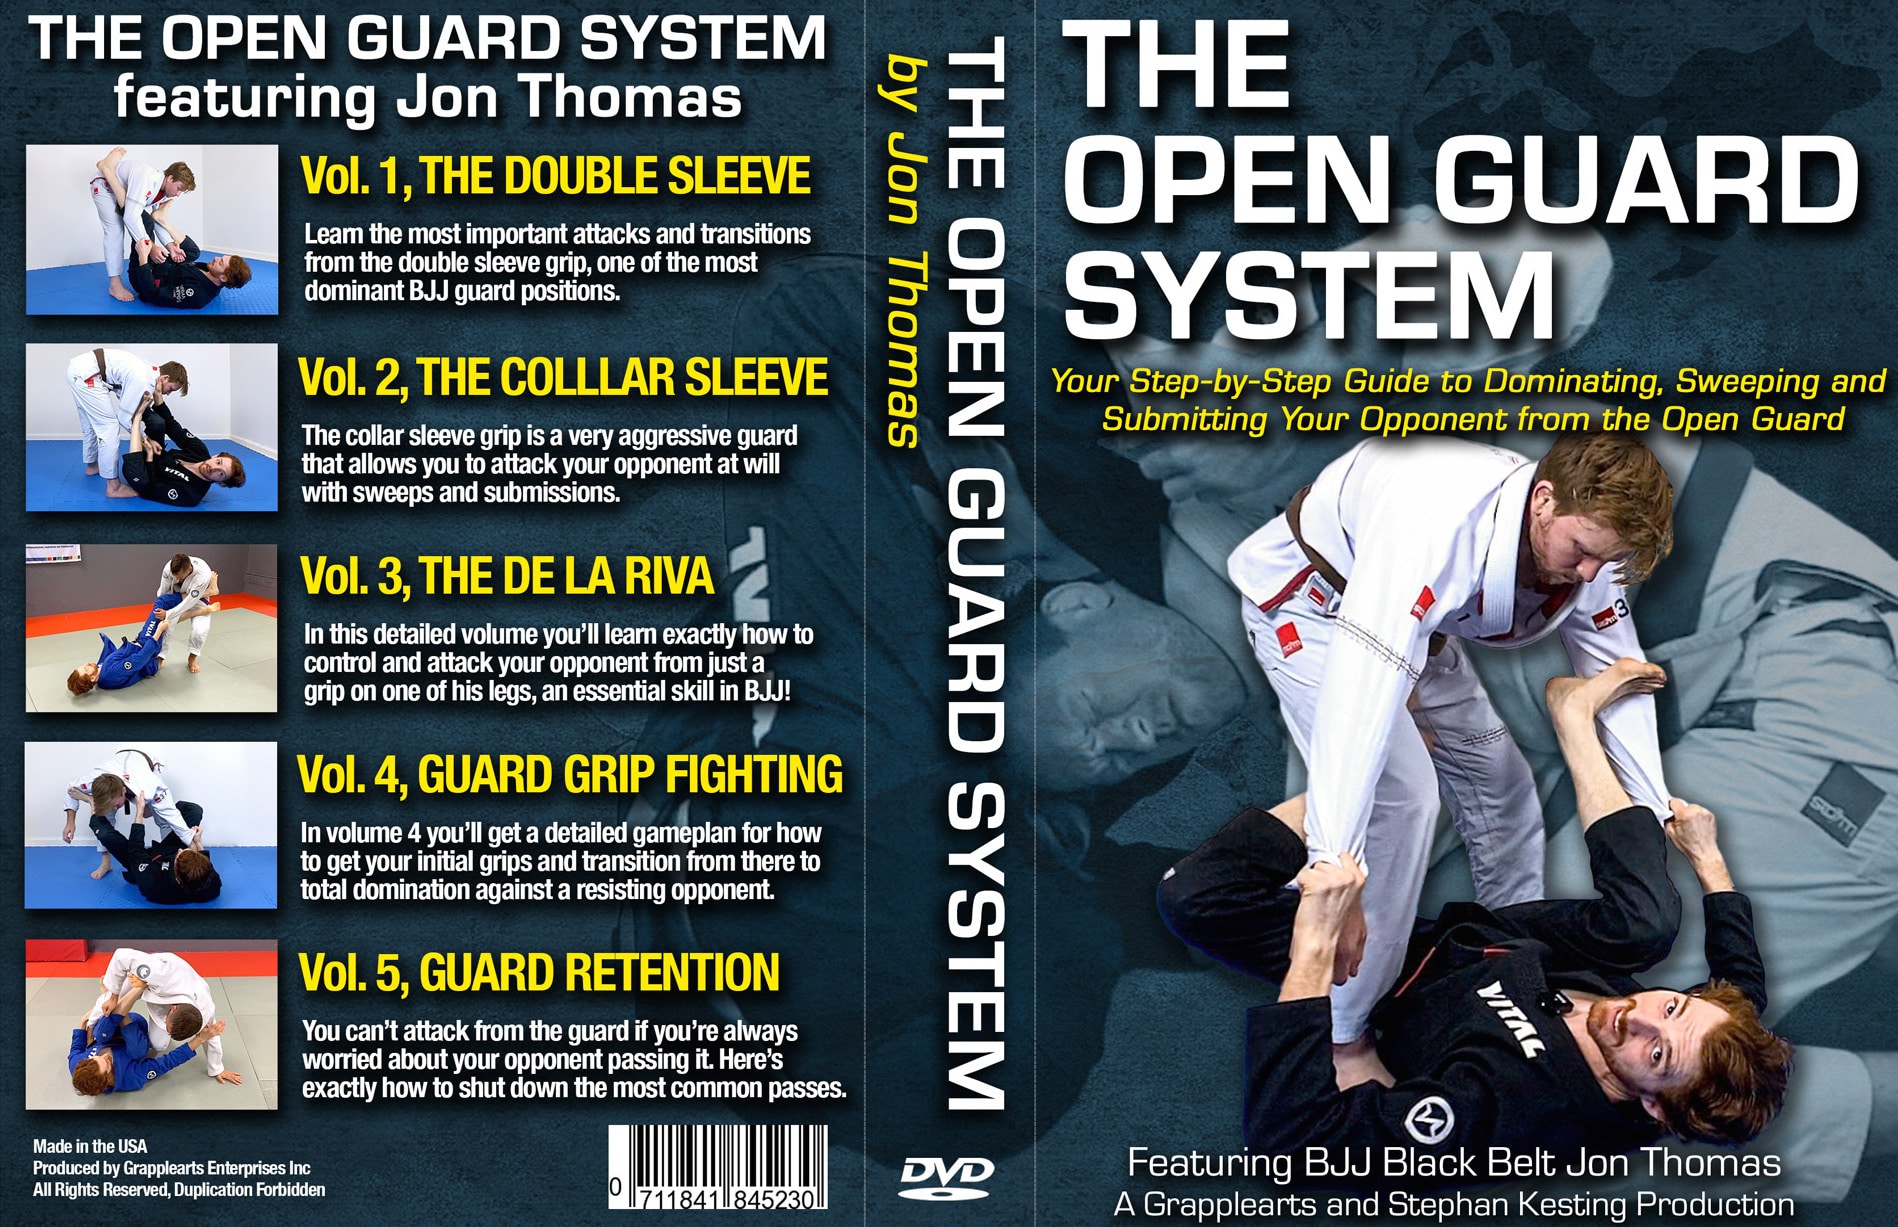 The Open Guard System with John Thomas